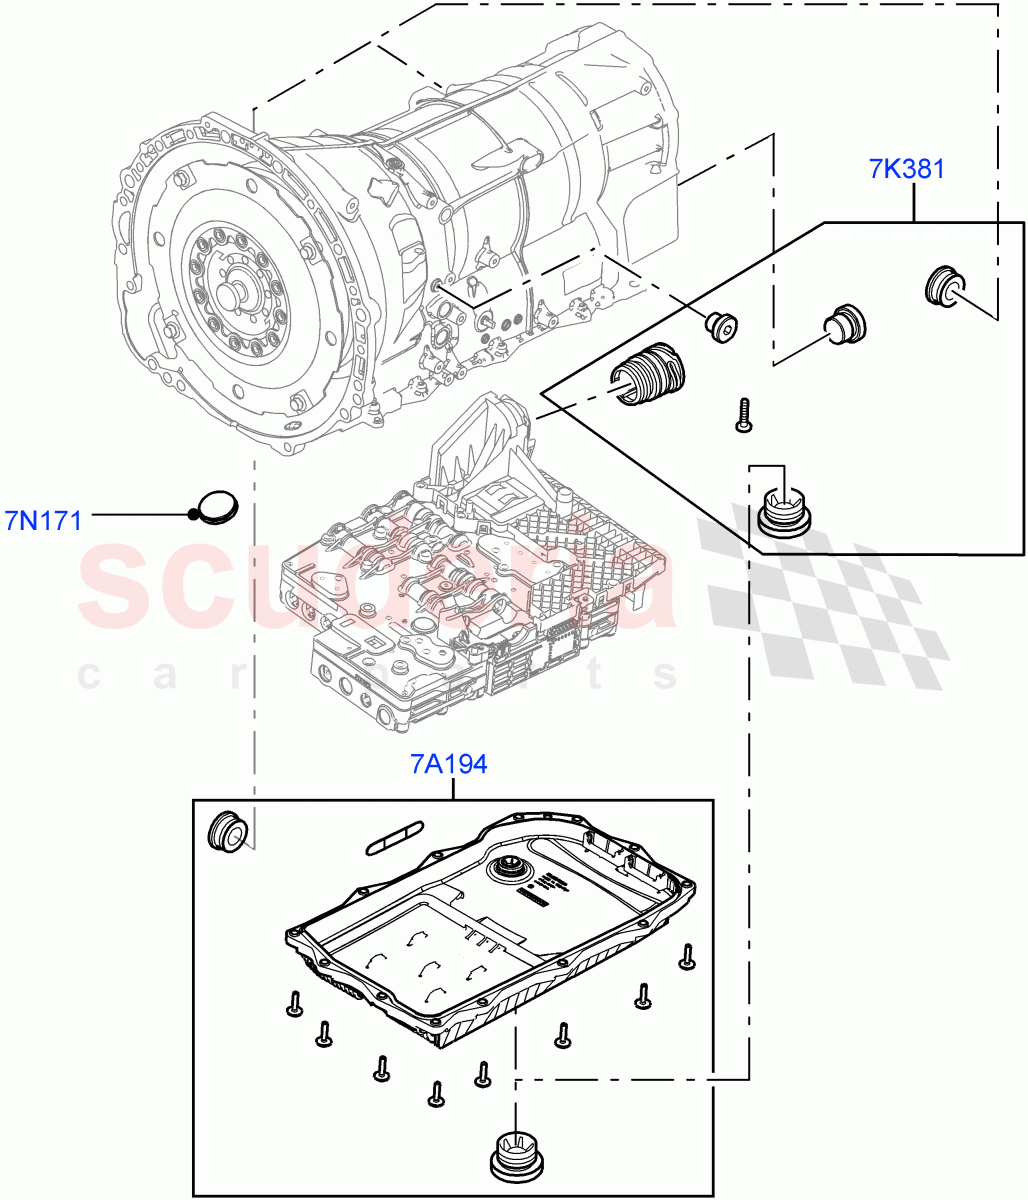 Transmission External Components(5.0L P AJ133 DOHC CDA S/C Enhanced,8 Speed Auto Trans ZF 8HP70 4WD)((V)FROMKA000001) of Land Rover Land Rover Range Rover Velar (2017+) [2.0 Turbo Diesel]